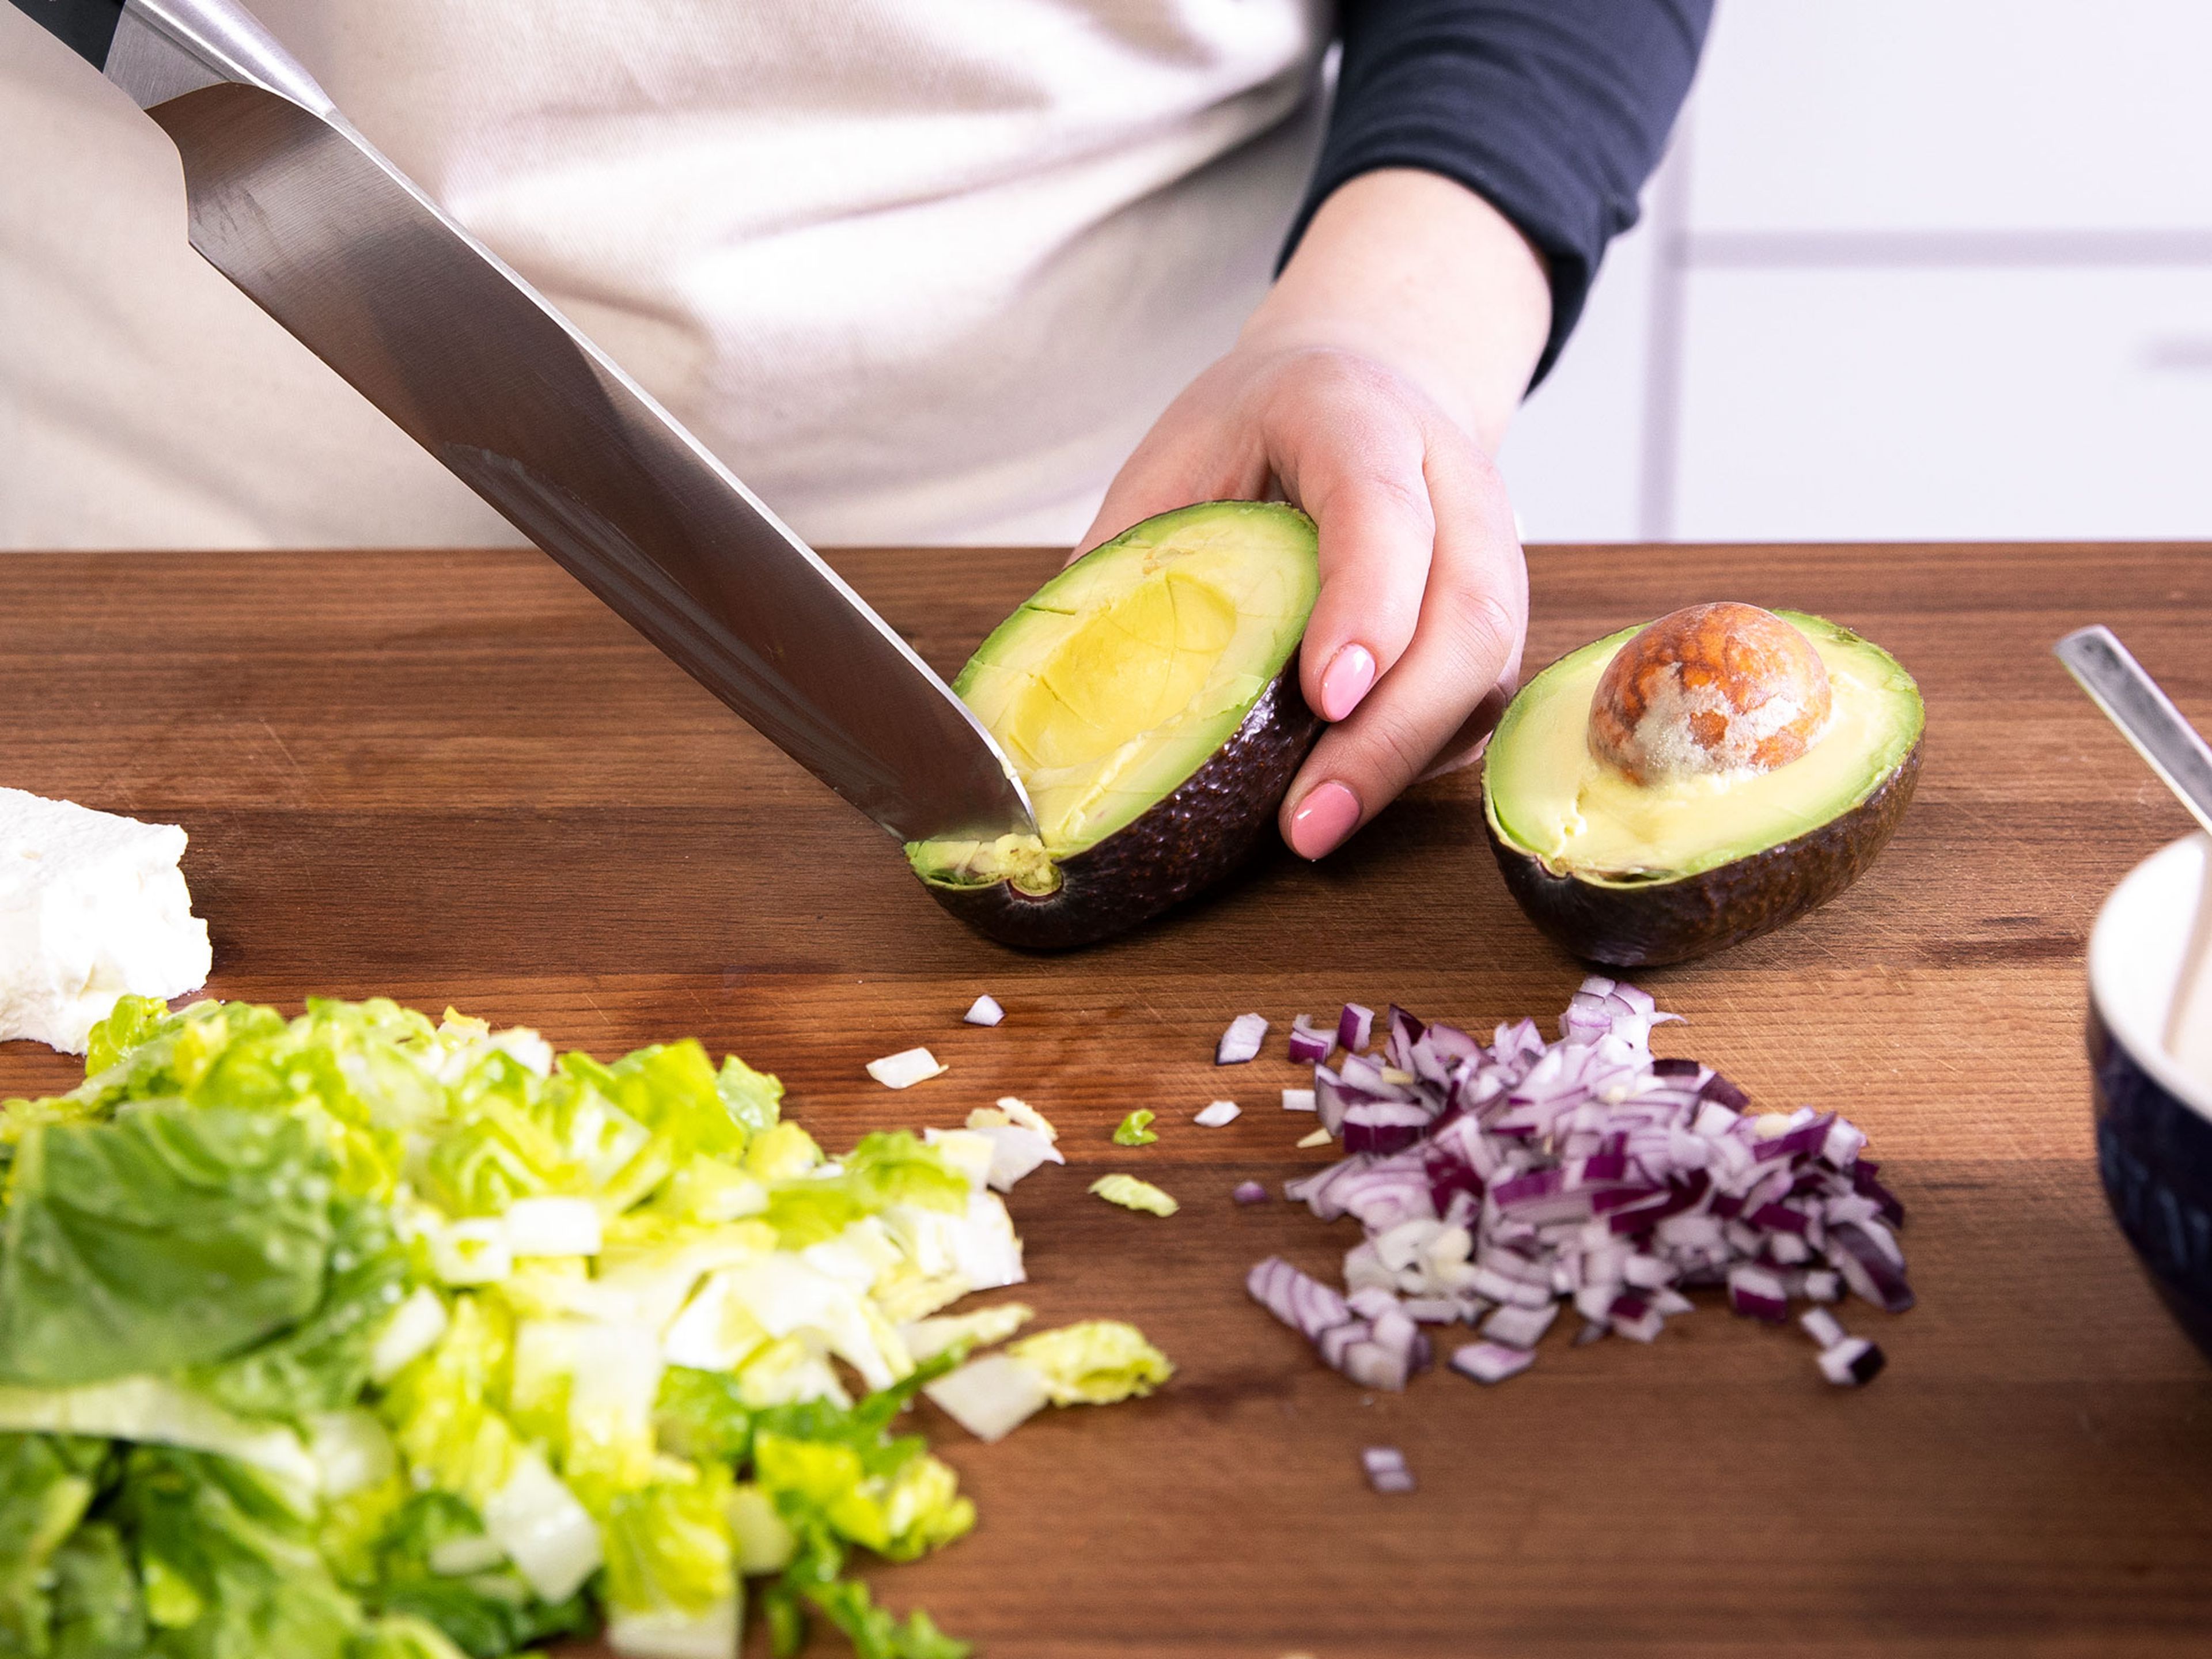 Chop avocado and romaine heart, and finely dice red onion. For the dressing, add olive oil, white wine vinegar, and honey to a small bowl. Stir to combine and season with salt and pepper to taste.